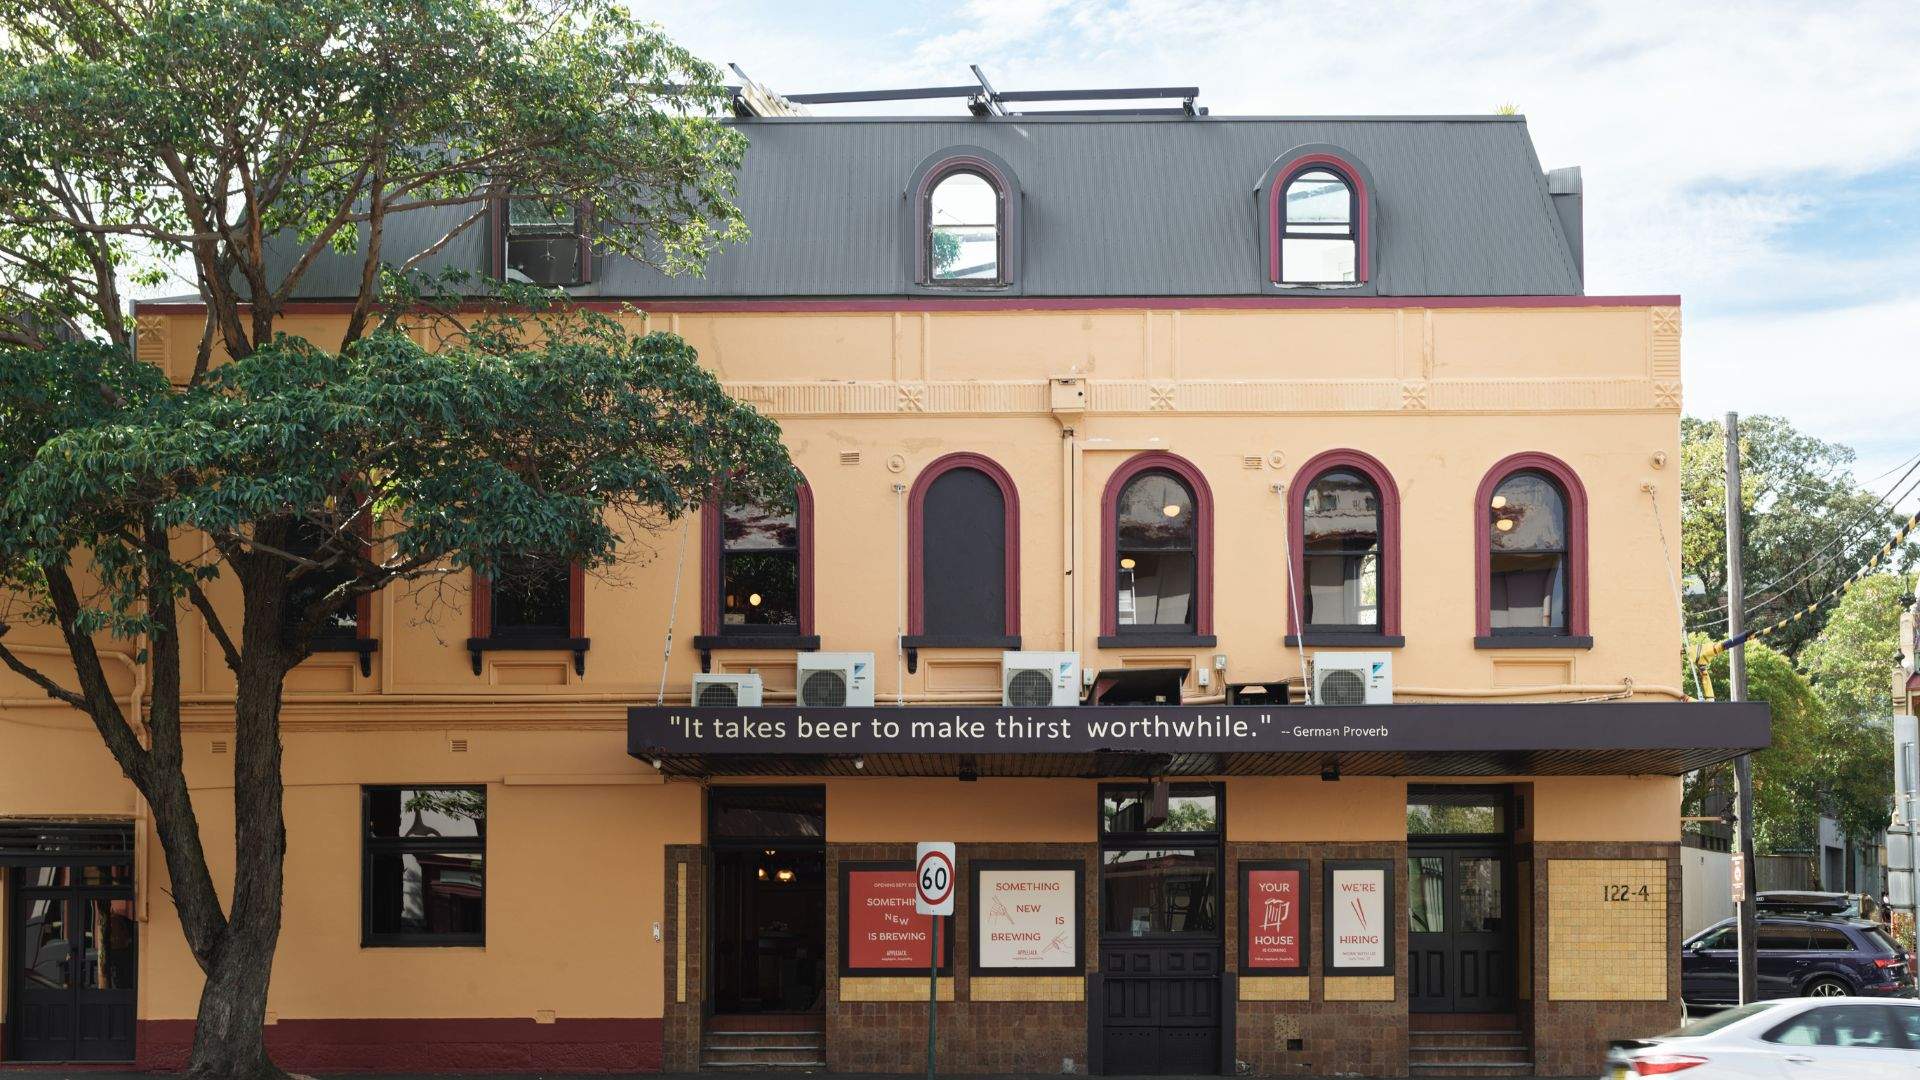 The Taphouse's restored exterior — located on Flinders Street, Darlinghurst.